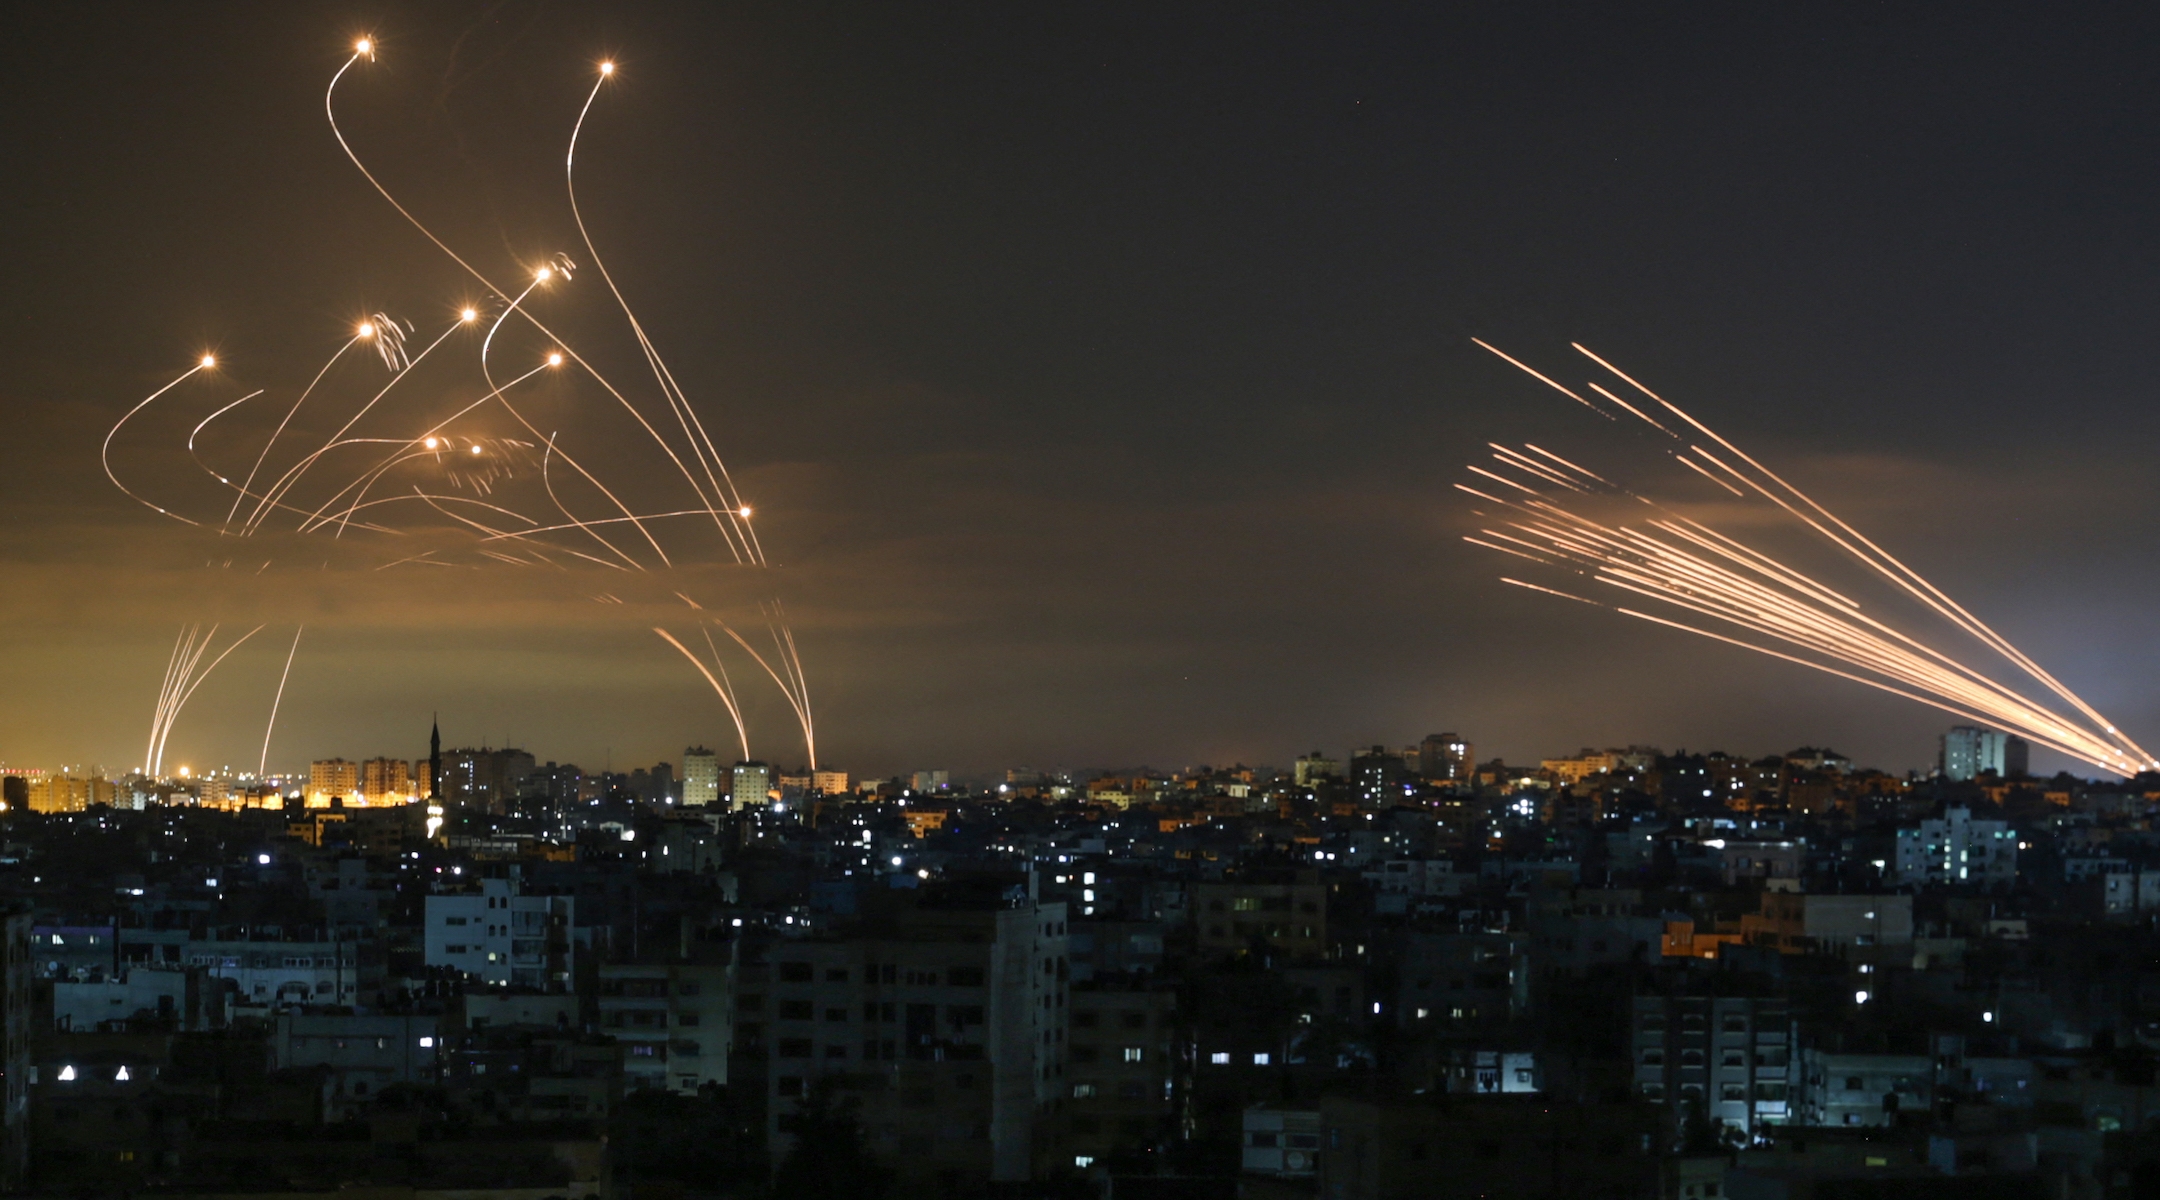 The Iron Dome interceptors (left) meet a volley of missiles from Gaza (right) on May 14, 2021. (Anas Baba/AFP via Getty Images)